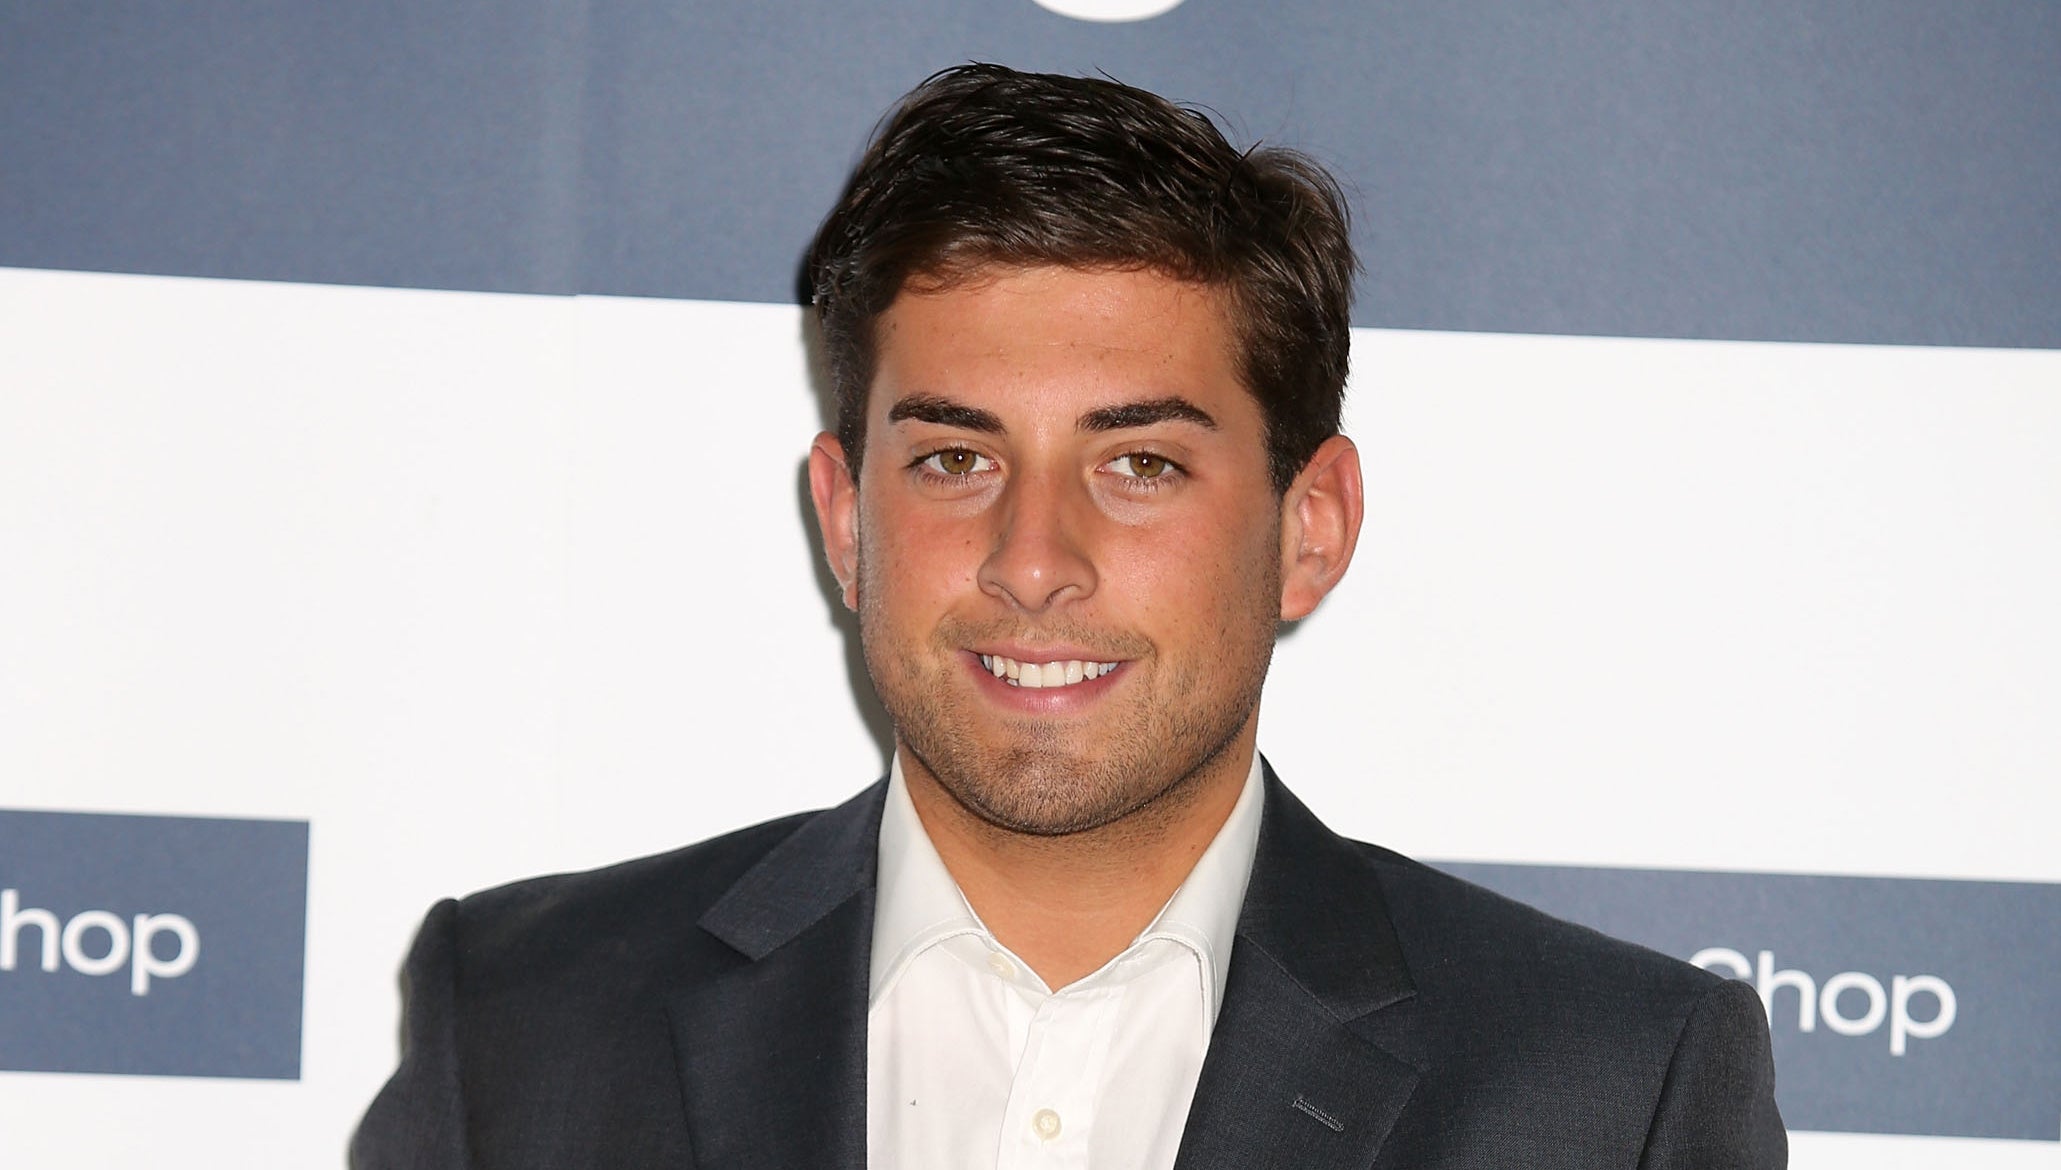 James Argent from Towie is missing, police say